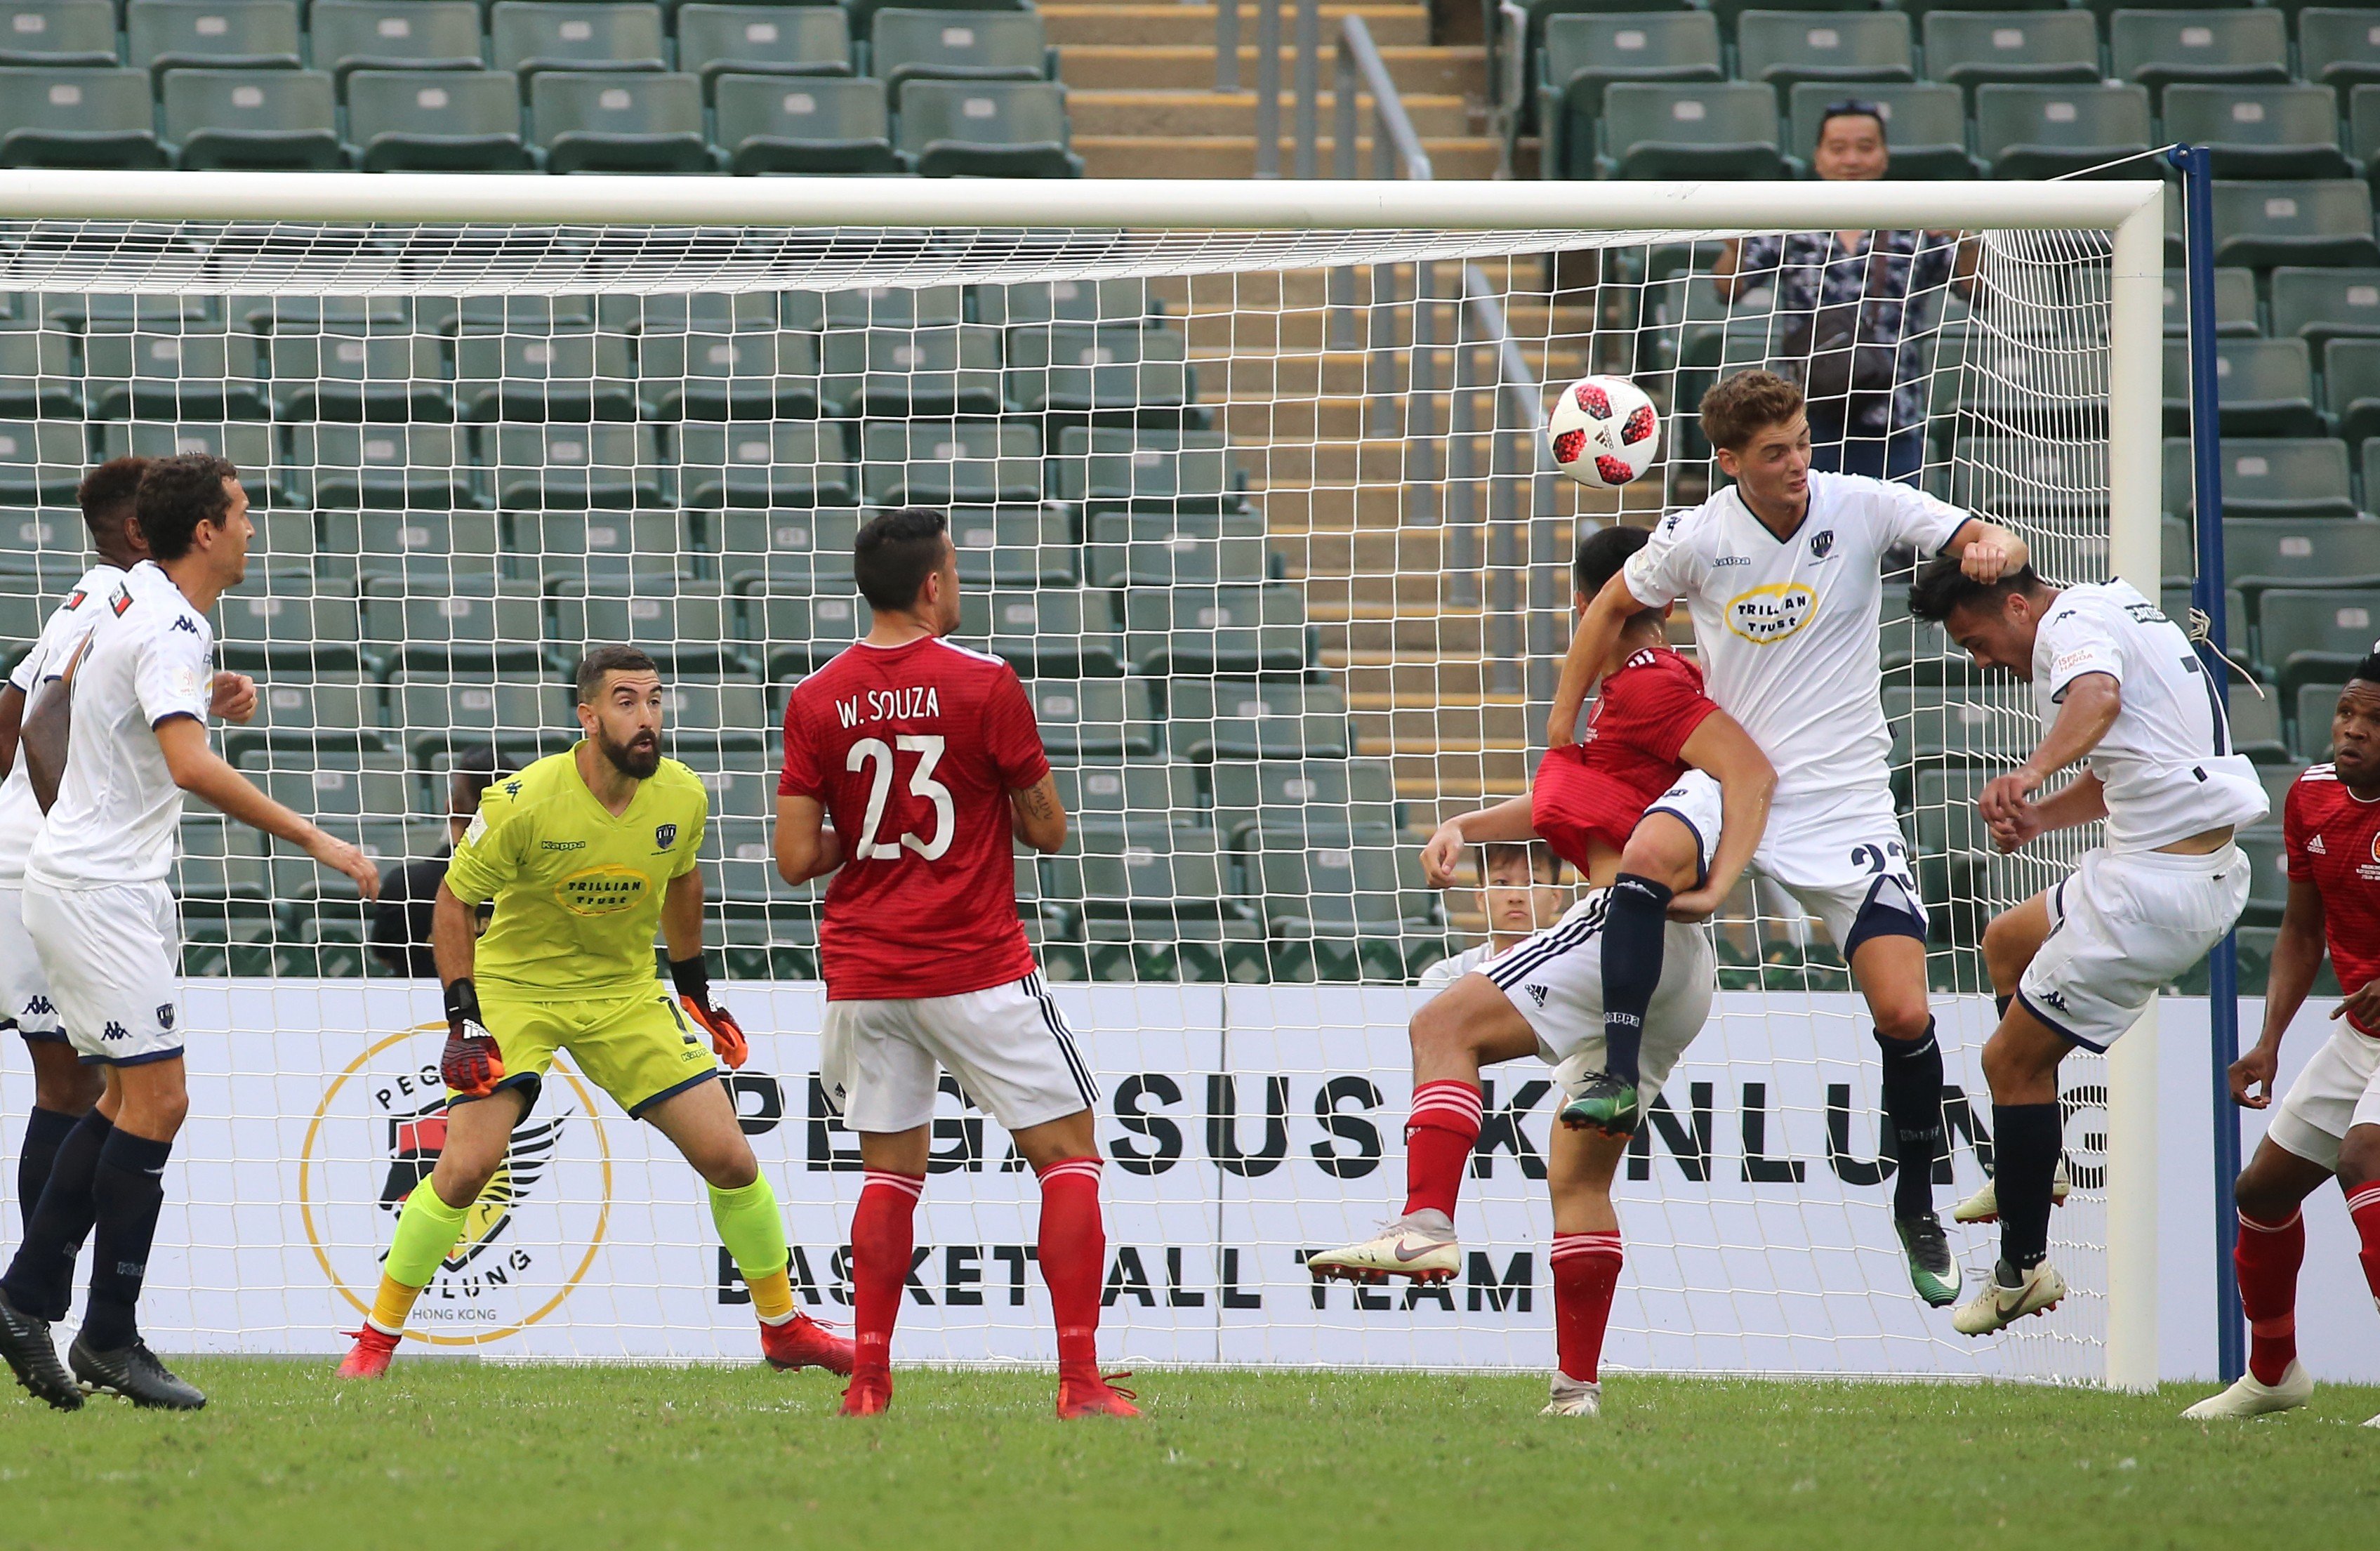 Hong Kong’s CNY select team held on to beat Auckland City and claim third sport in the Lunar New Year Cup at Hong Kong Stadium. Photos: Dickson Lee